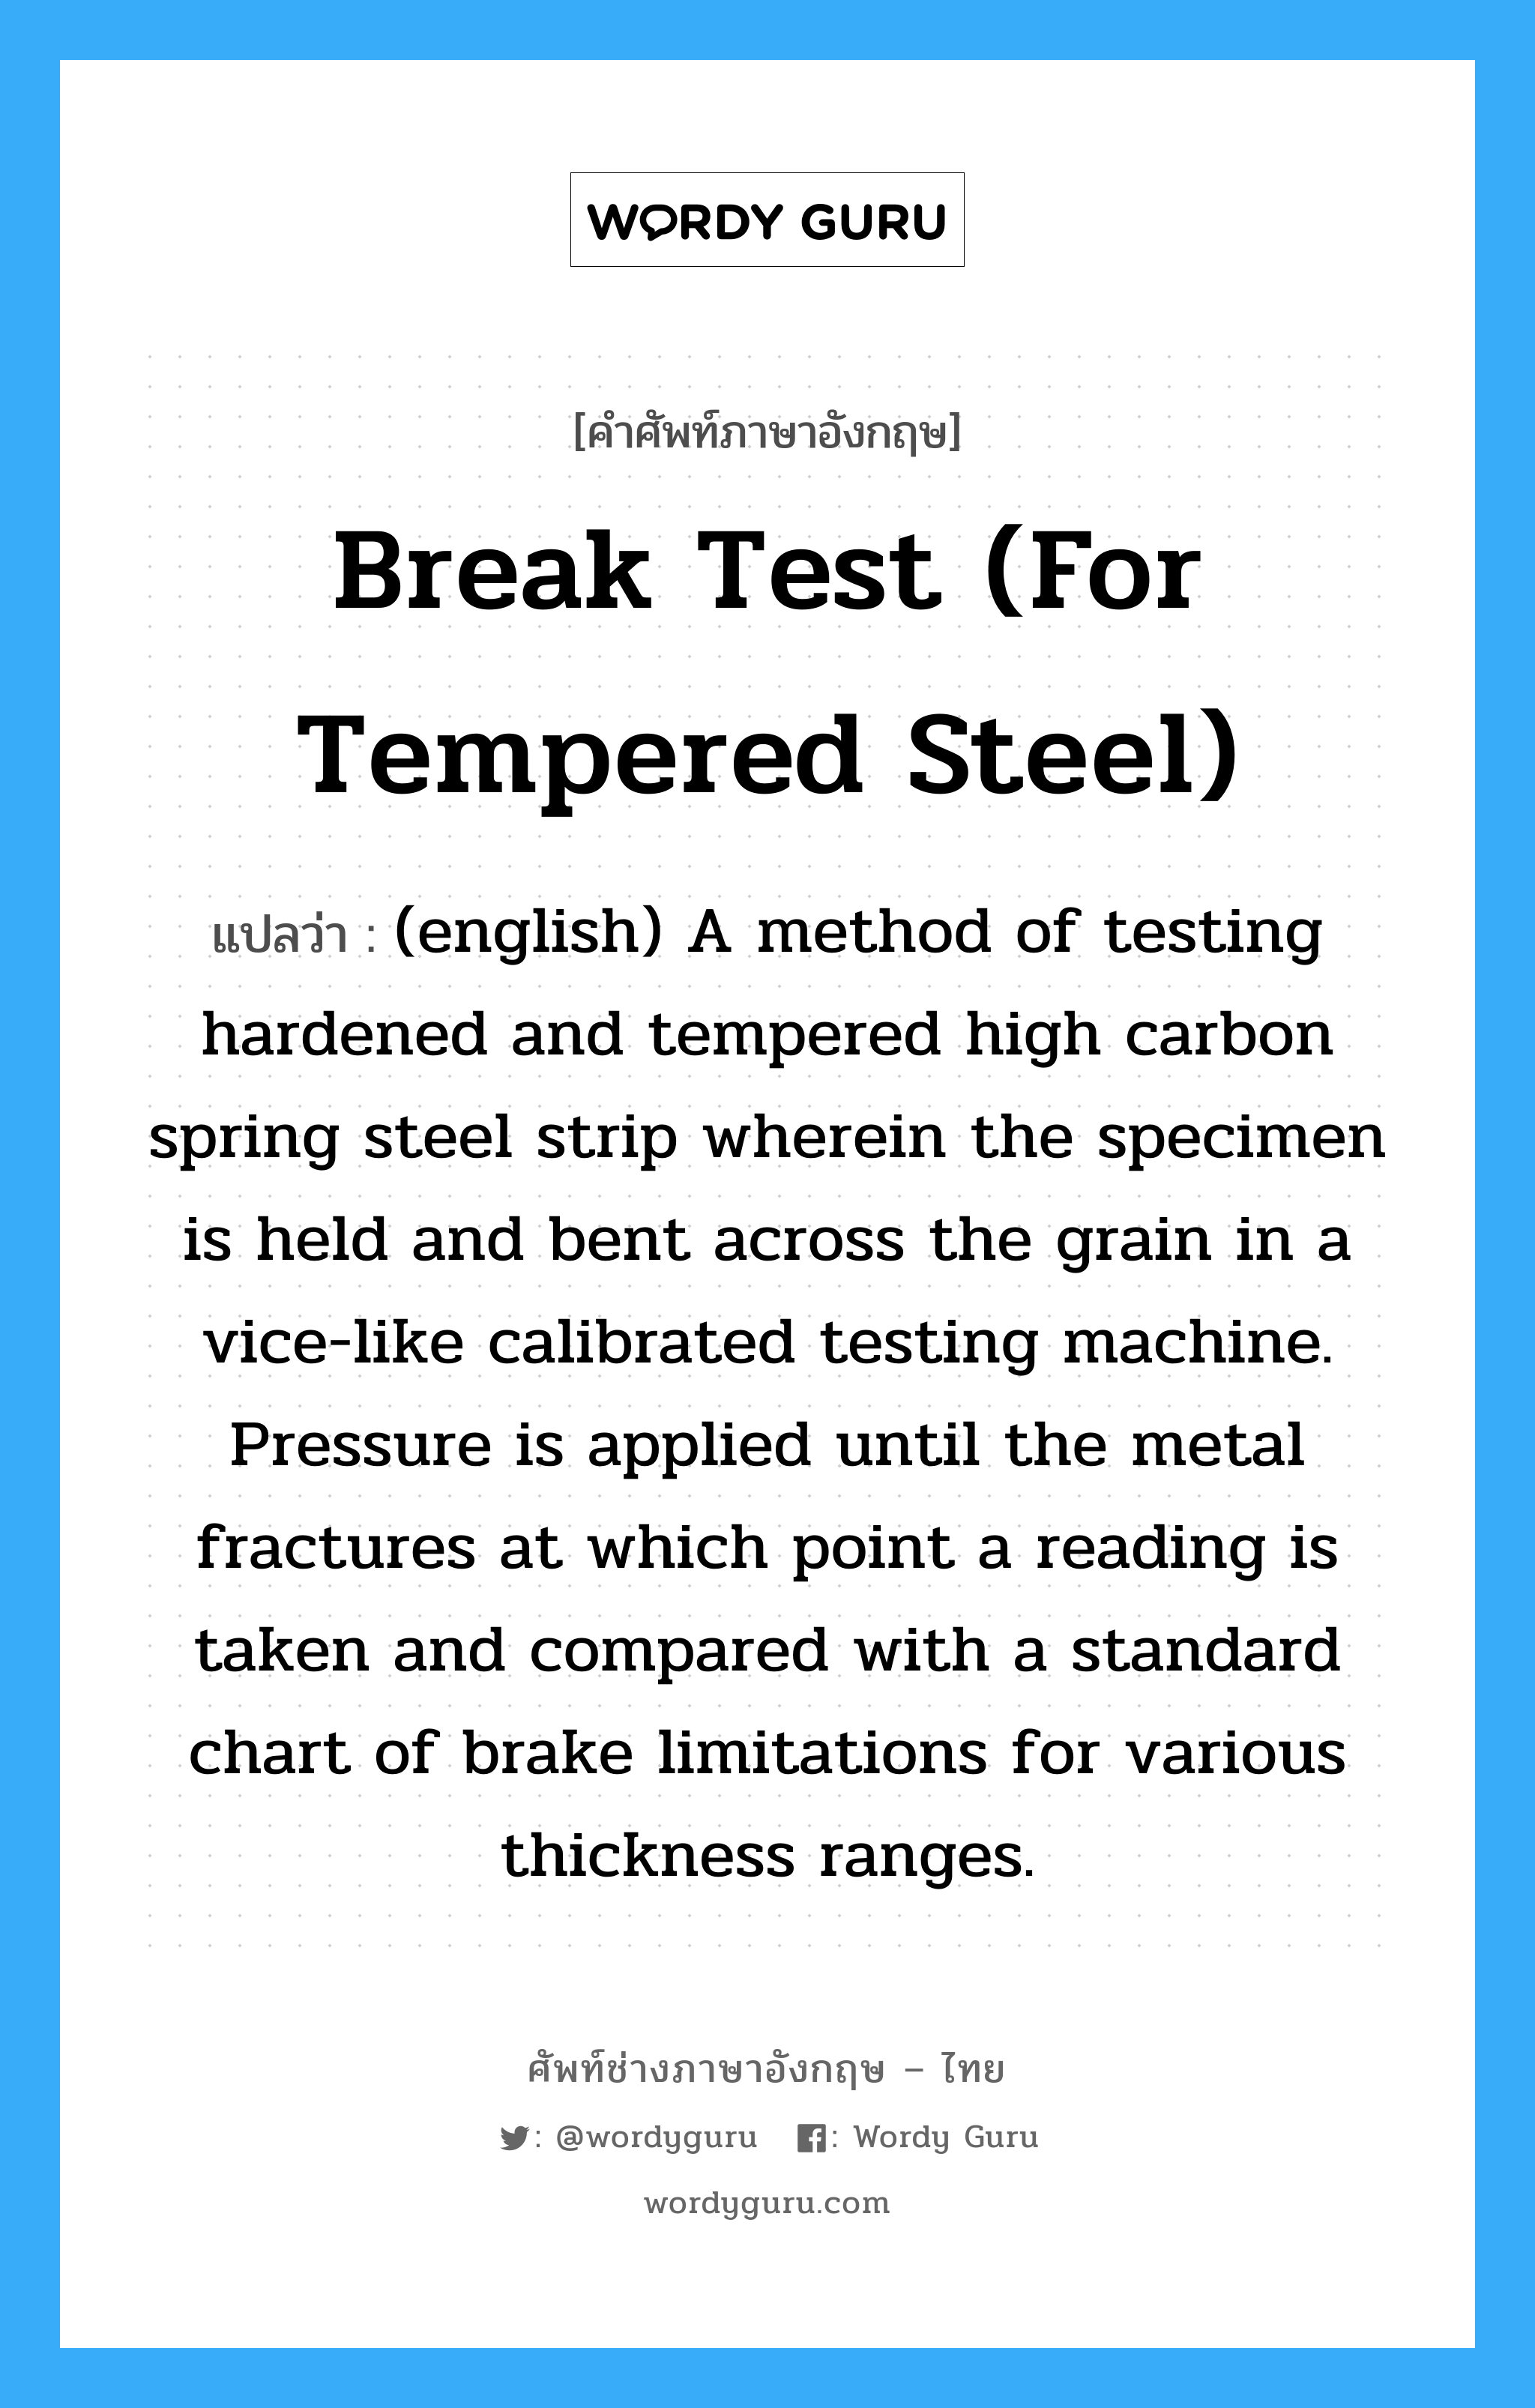 (english) A method of testing hardened and tempered high carbon spring steel strip wherein the specimen is held and bent across the grain in a vice-like calibrated testing machine. Pressure is applied until the metal fractures at which point a reading is taken and compared with a standard chart of brake limitations for various thickness ranges. ภาษาอังกฤษ?, คำศัพท์ช่างภาษาอังกฤษ - ไทย (english) A method of testing hardened and tempered high carbon spring steel strip wherein the specimen is held and bent across the grain in a vice-like calibrated testing machine. Pressure is applied until the metal fractures at which point a reading is taken and compared with a standard chart of brake limitations for various thickness ranges. คำศัพท์ภาษาอังกฤษ (english) A method of testing hardened and tempered high carbon spring steel strip wherein the specimen is held and bent across the grain in a vice-like calibrated testing machine. Pressure is applied until the metal fractures at which point a reading is taken and compared with a standard chart of brake limitations for various thickness ranges. แปลว่า Break Test (for tempered steel)